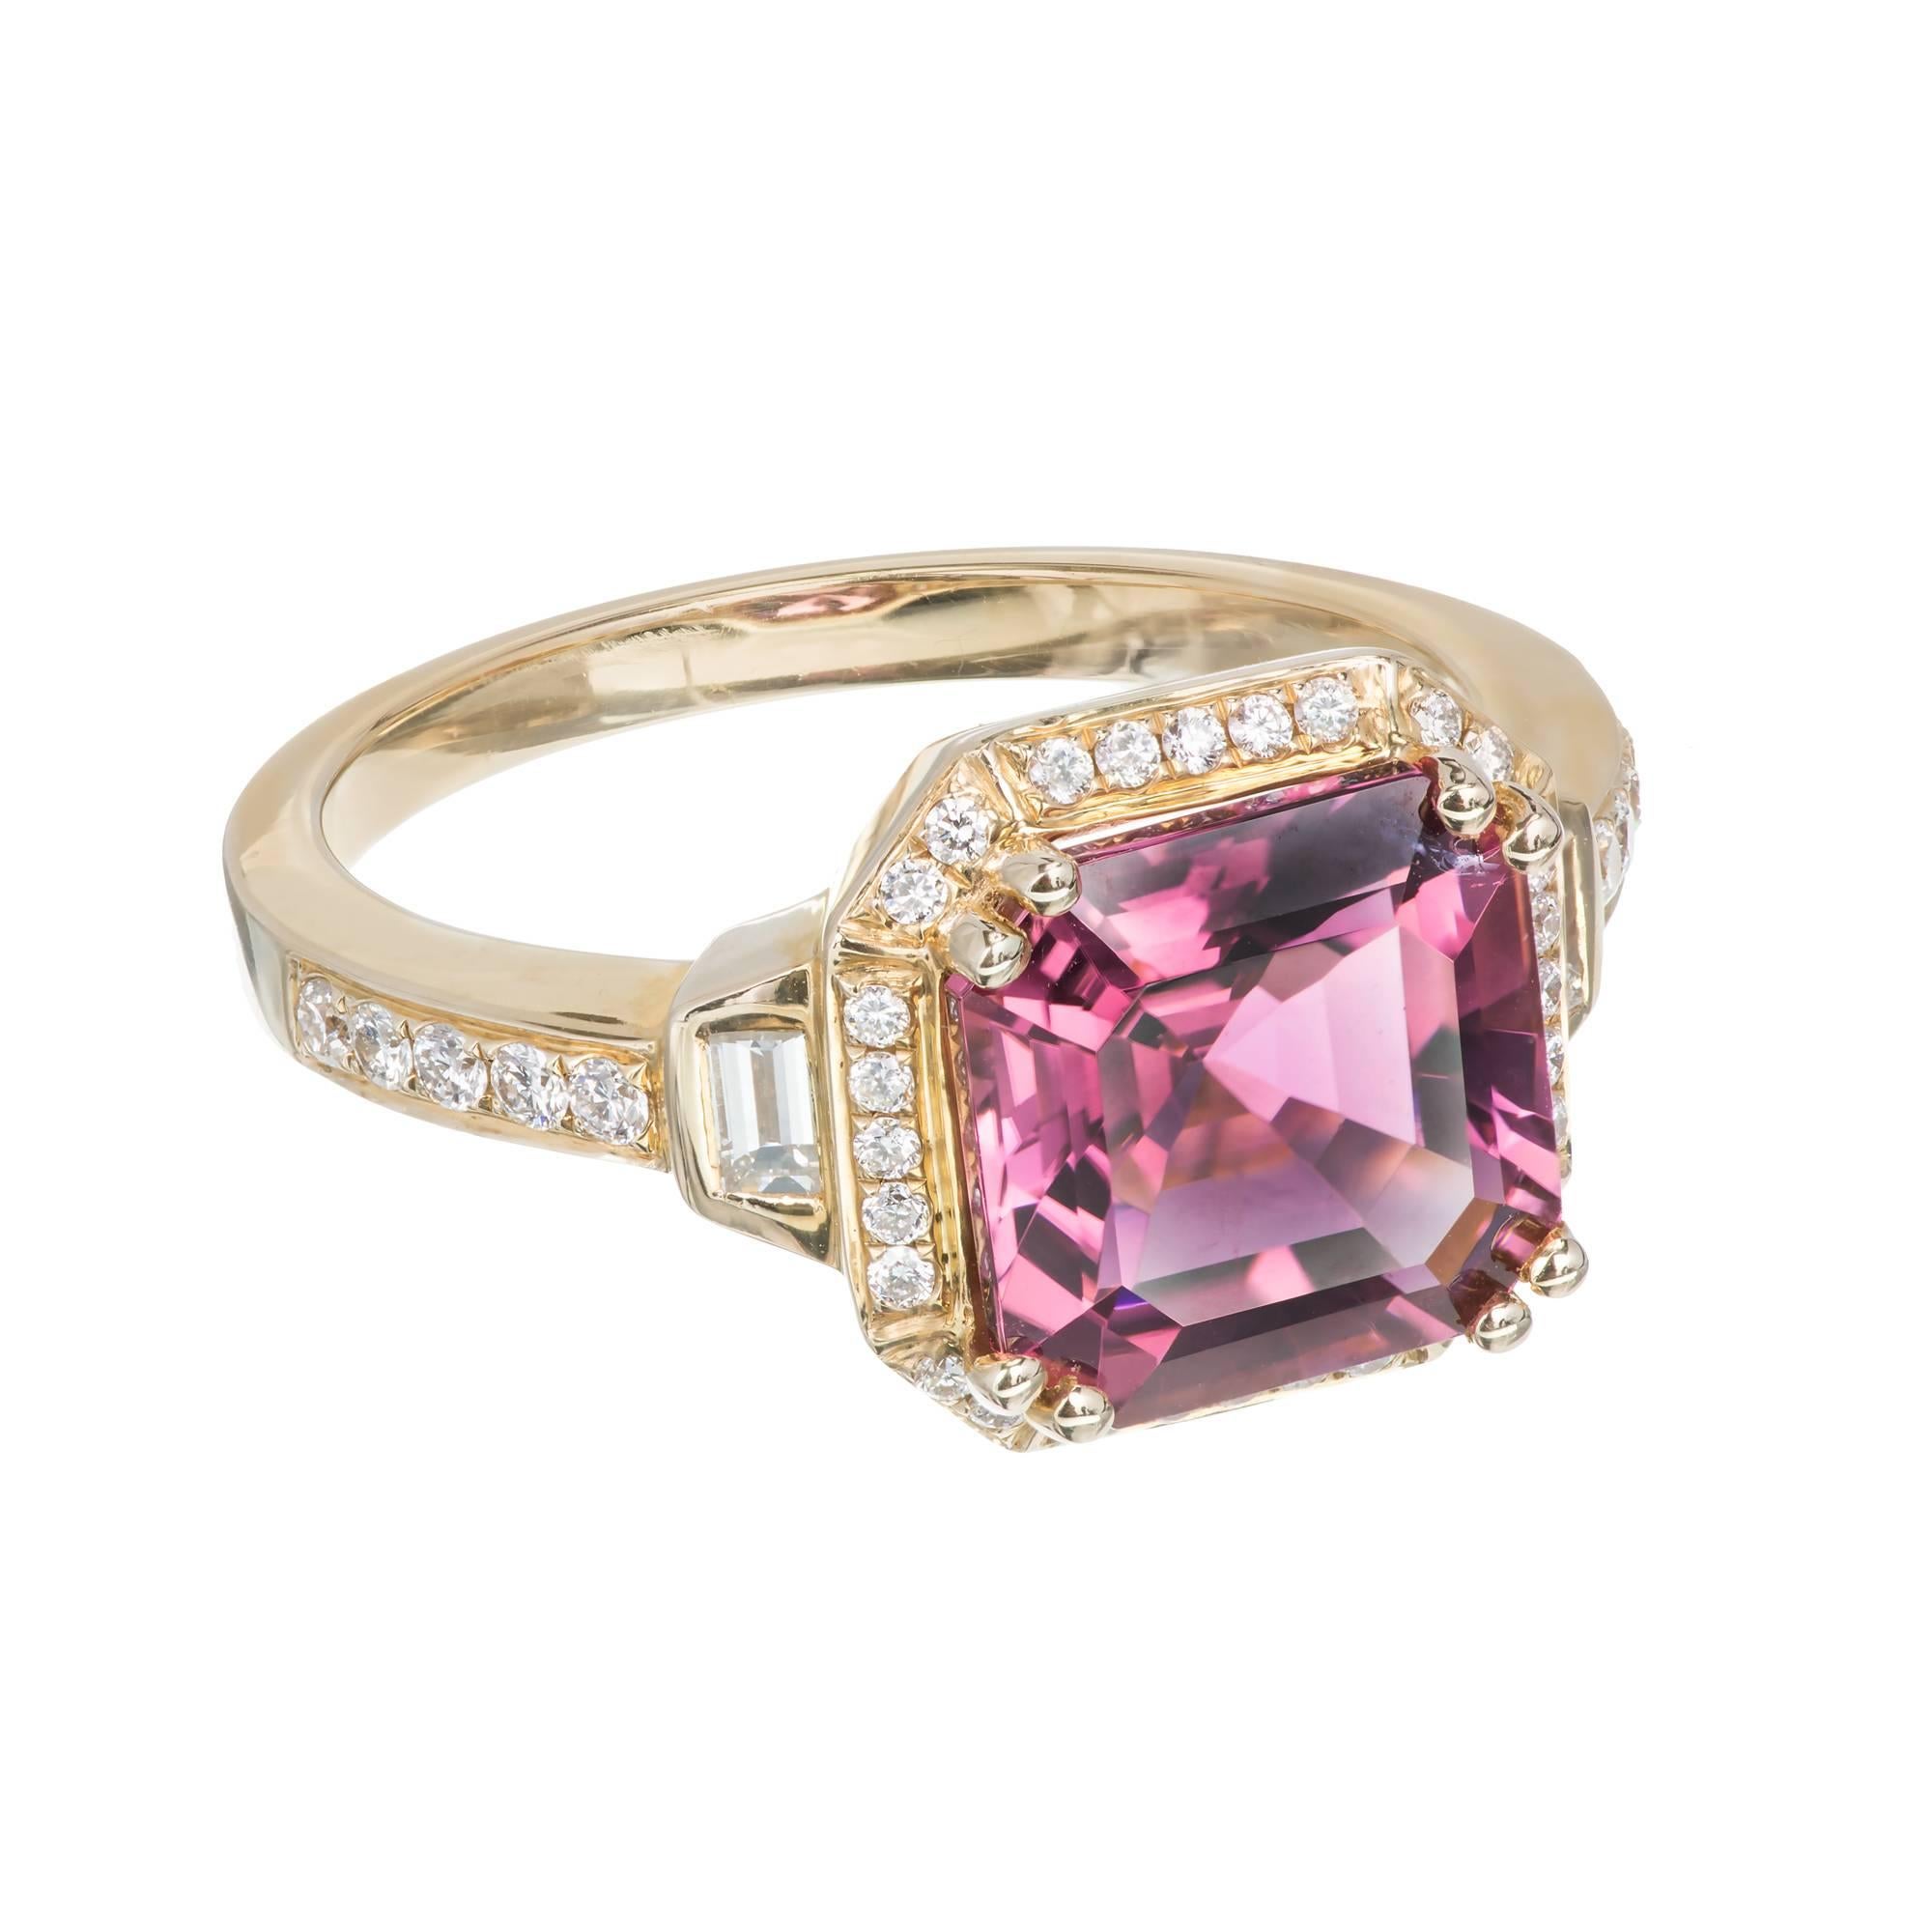 Square Emerald cut pink Tourmaline and diamond halo ring.  14k yellow gold signed JLJ. Small natural inclusions near one prong.

1 pink Tourmaline, approx. total weight 3.50cts, SI
38 round full cut diamonds, approx. total weight .15cts, H, VS
2